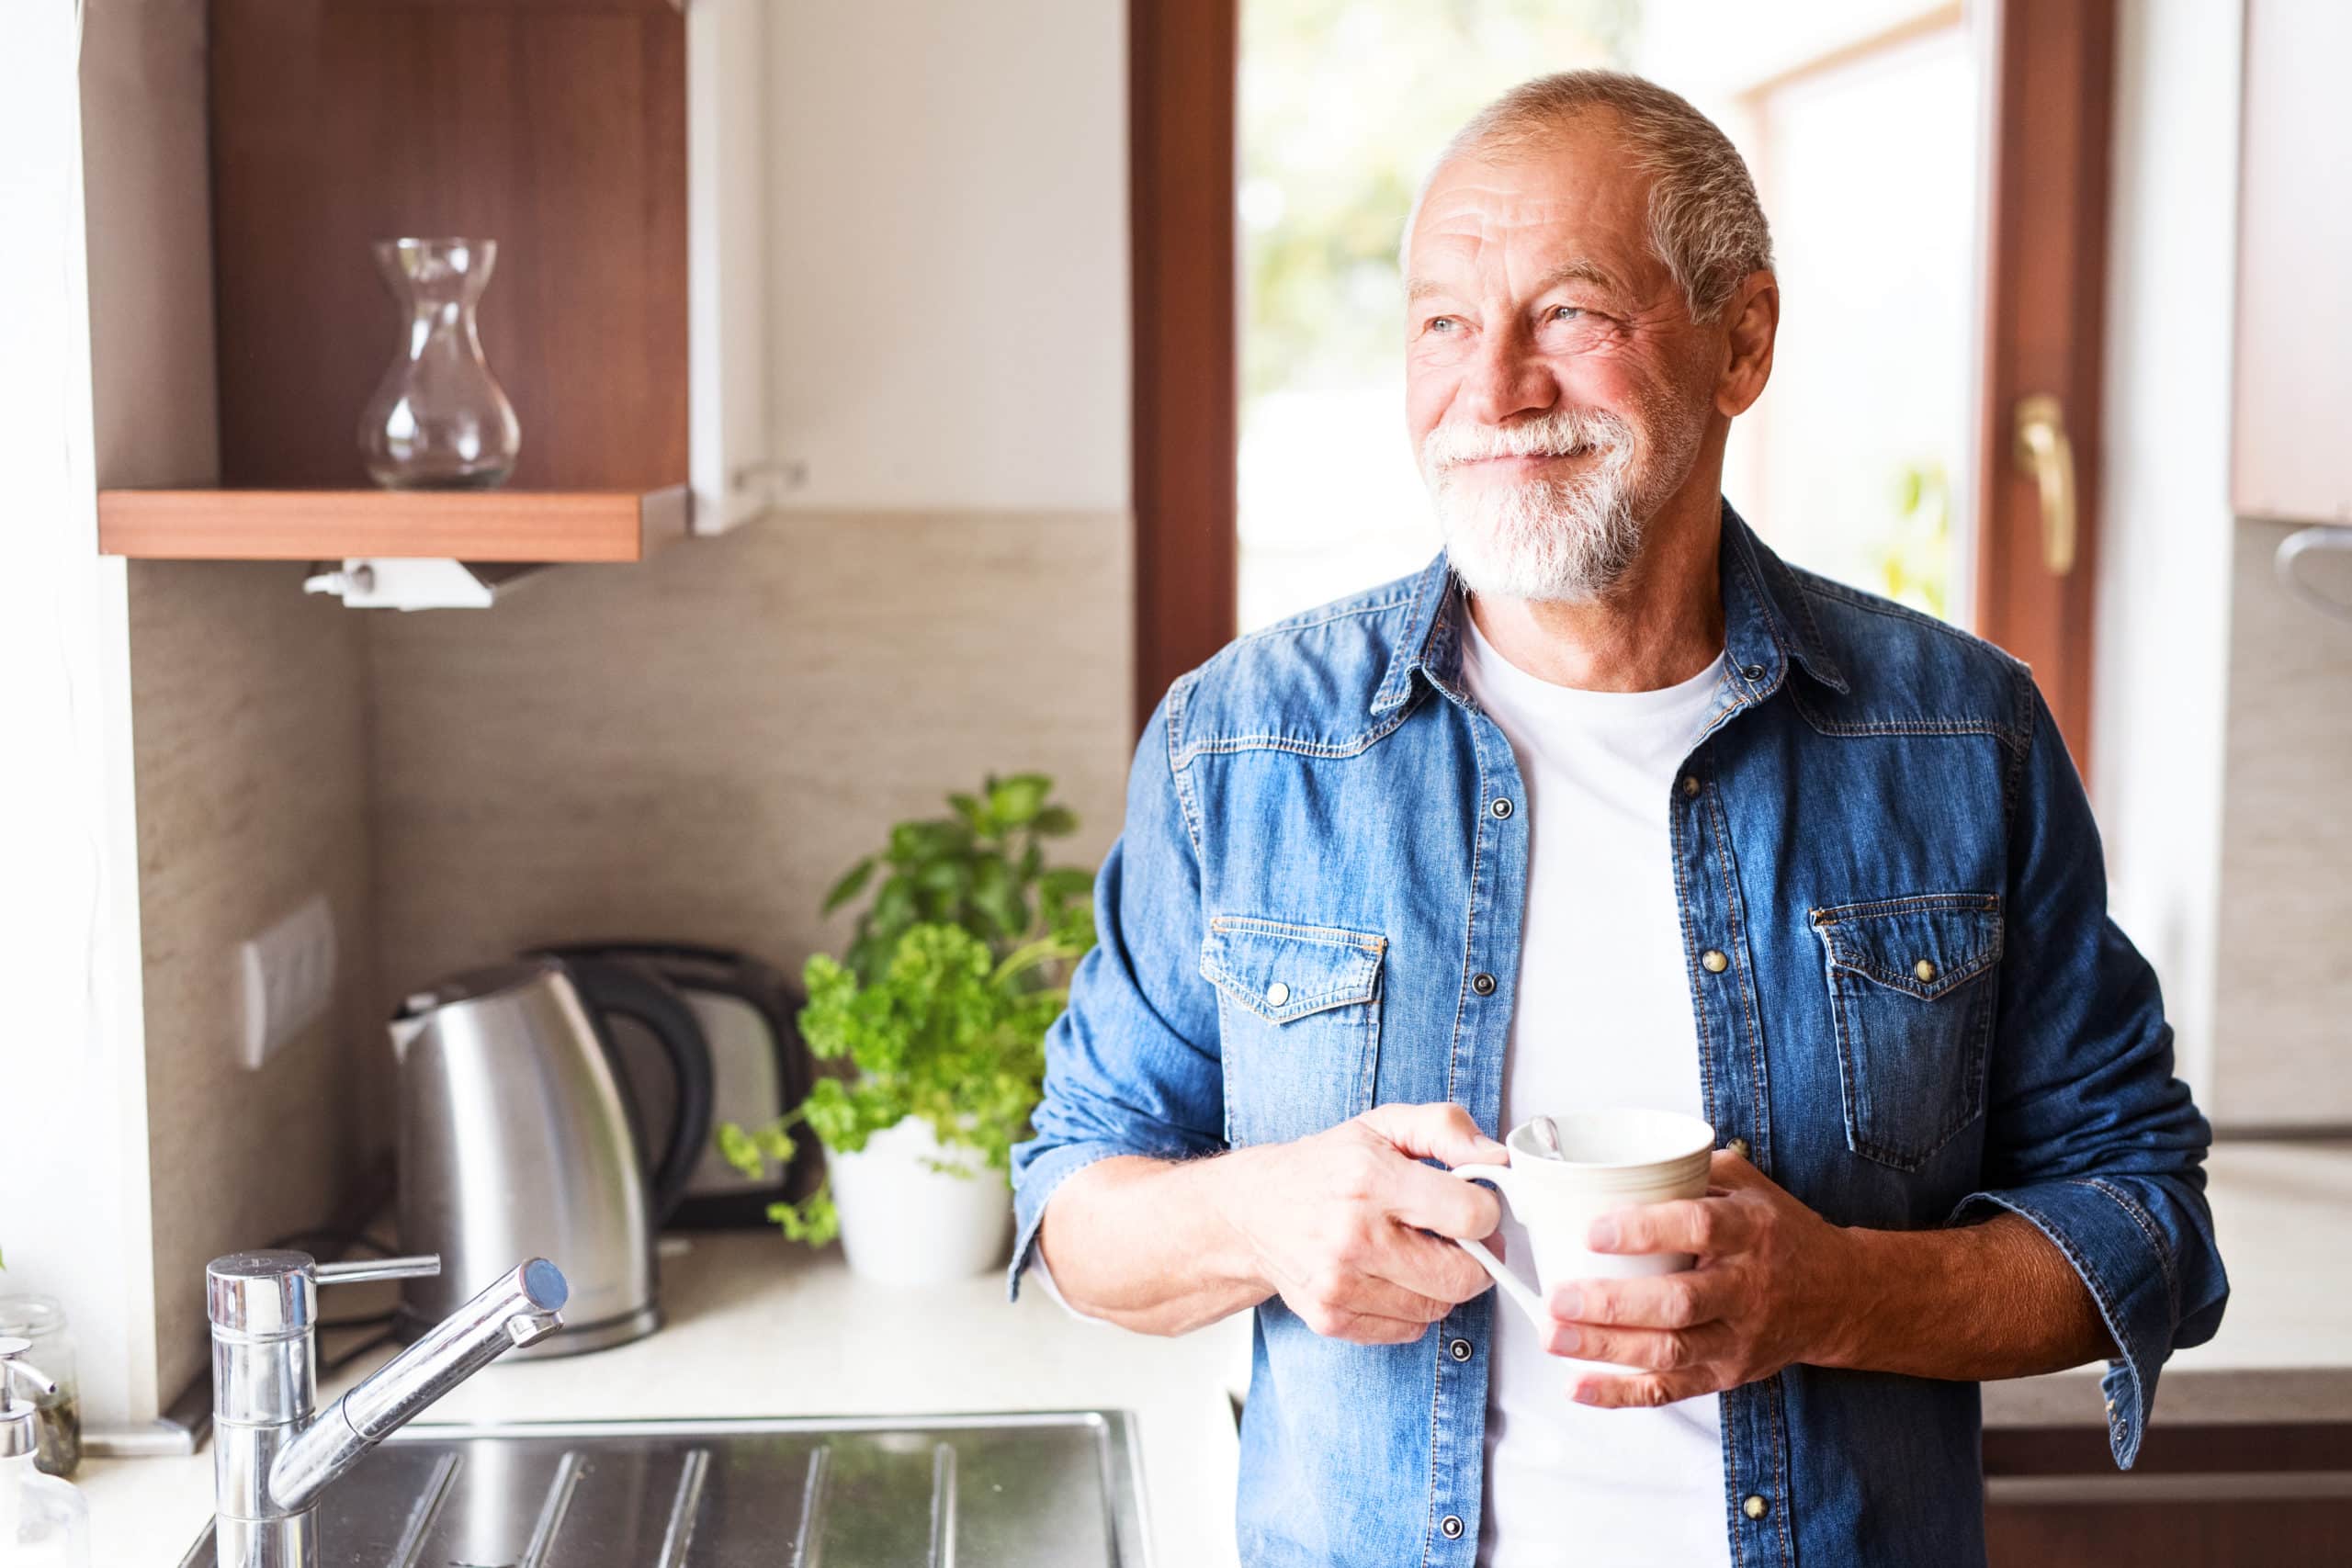 A happy elderly man holding a cup of coffee in a kitchen.